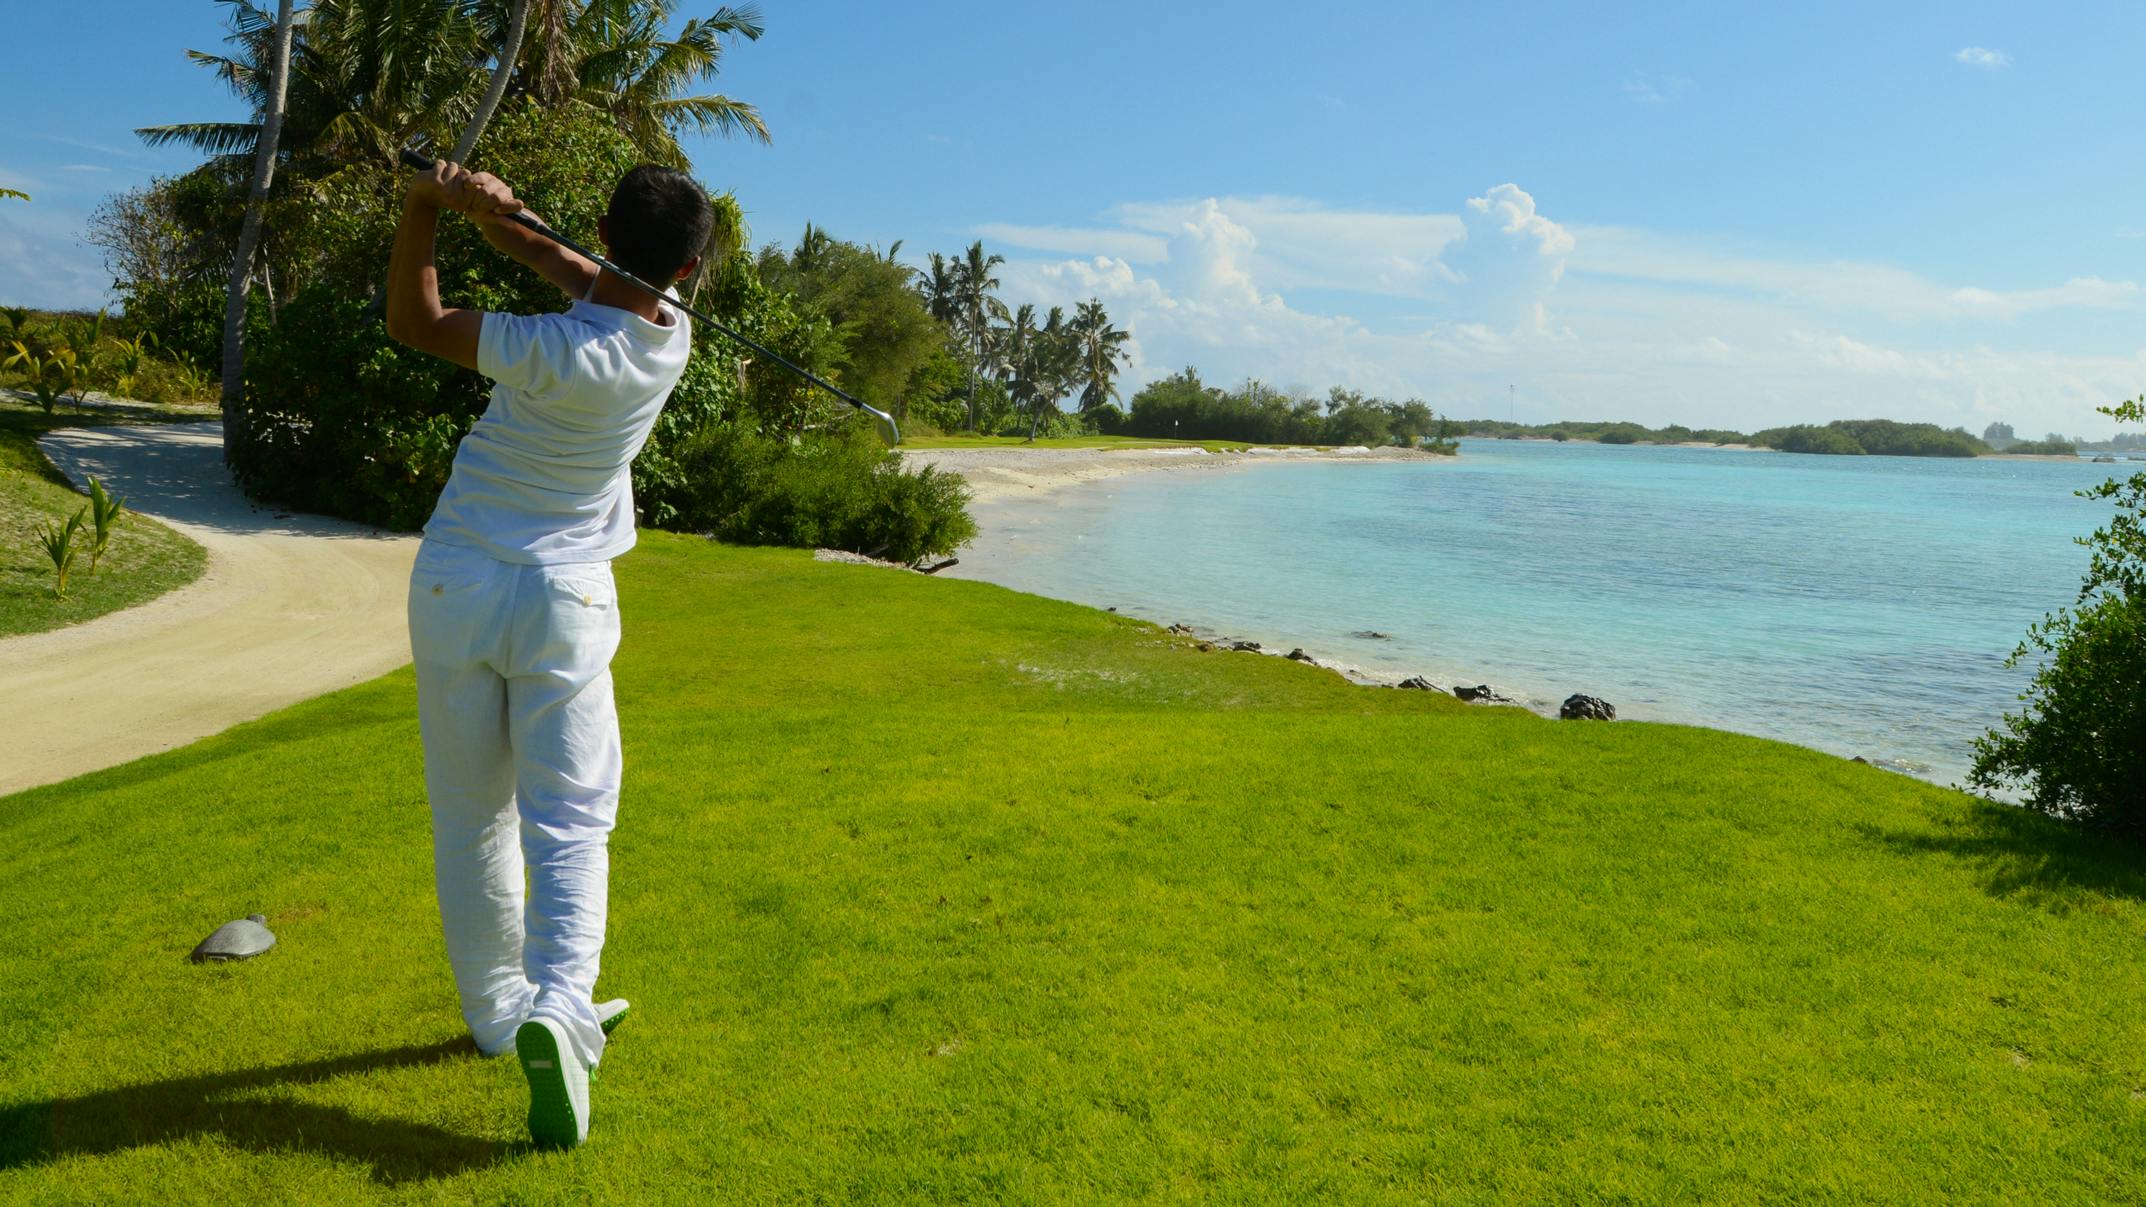 A man swings a golf club on a course next to tropical waters